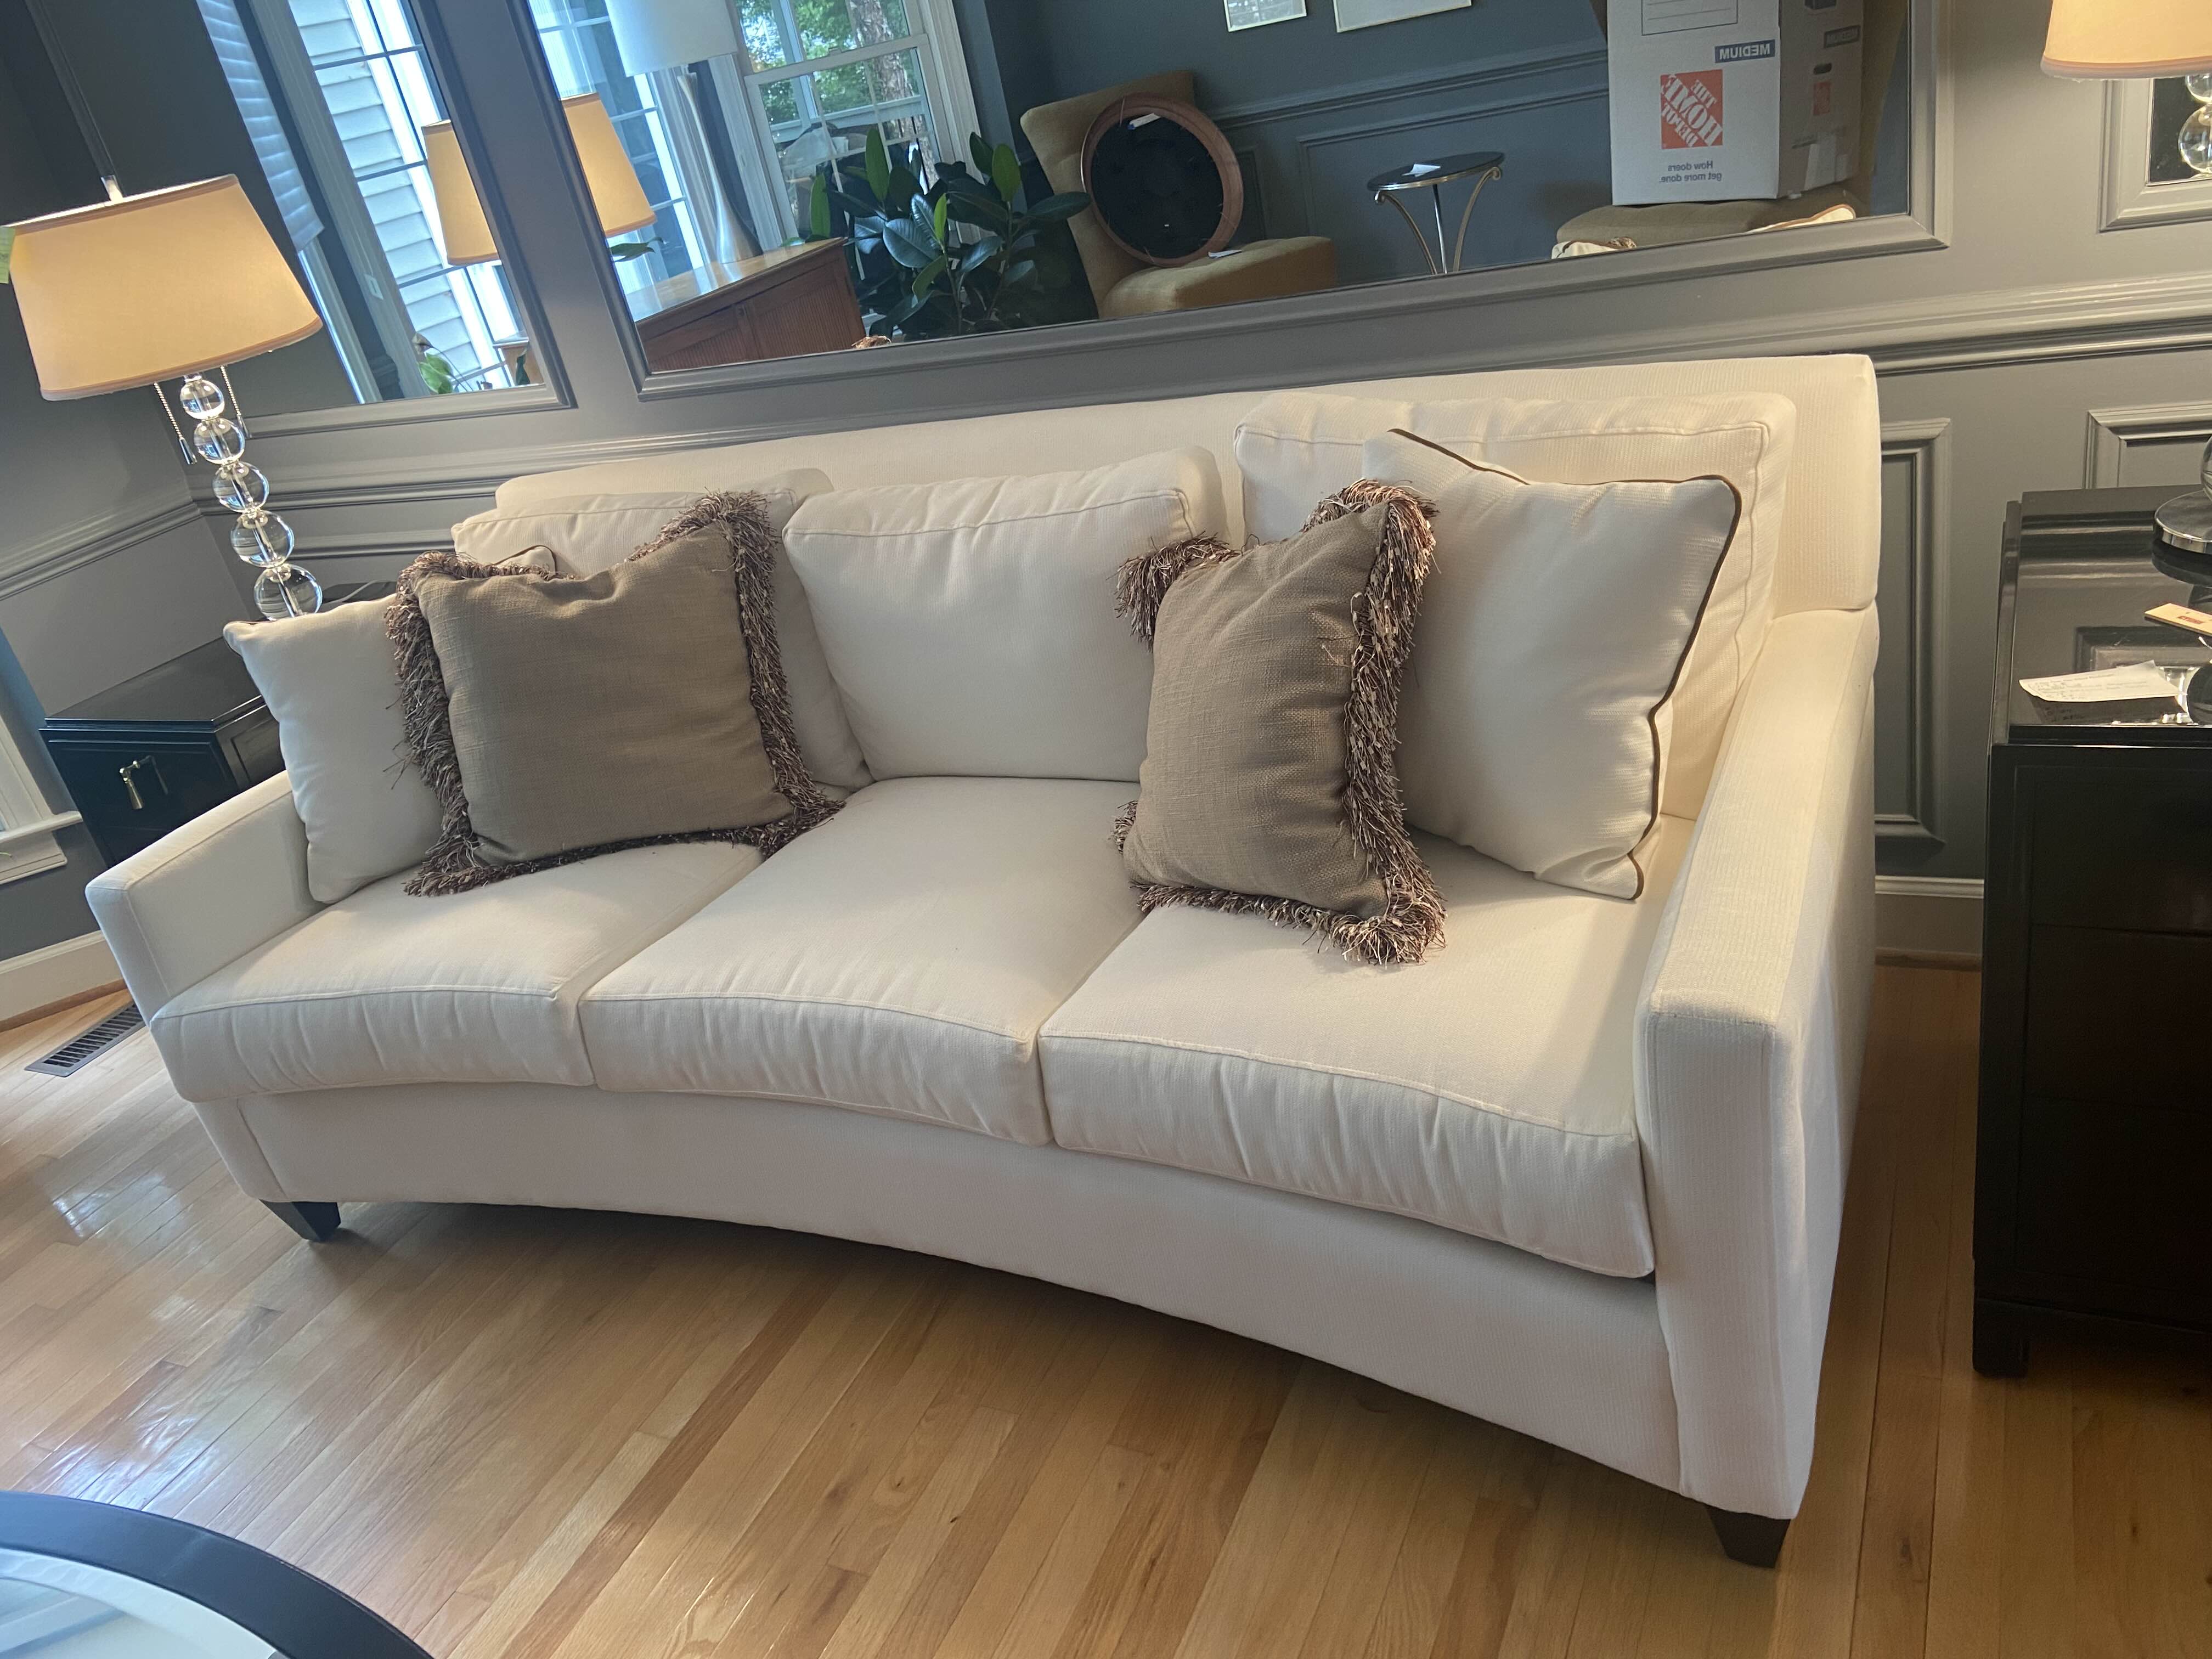 Precedent Cream Colored Couch (Curved Front) W/ Cushions & Toss Pillows